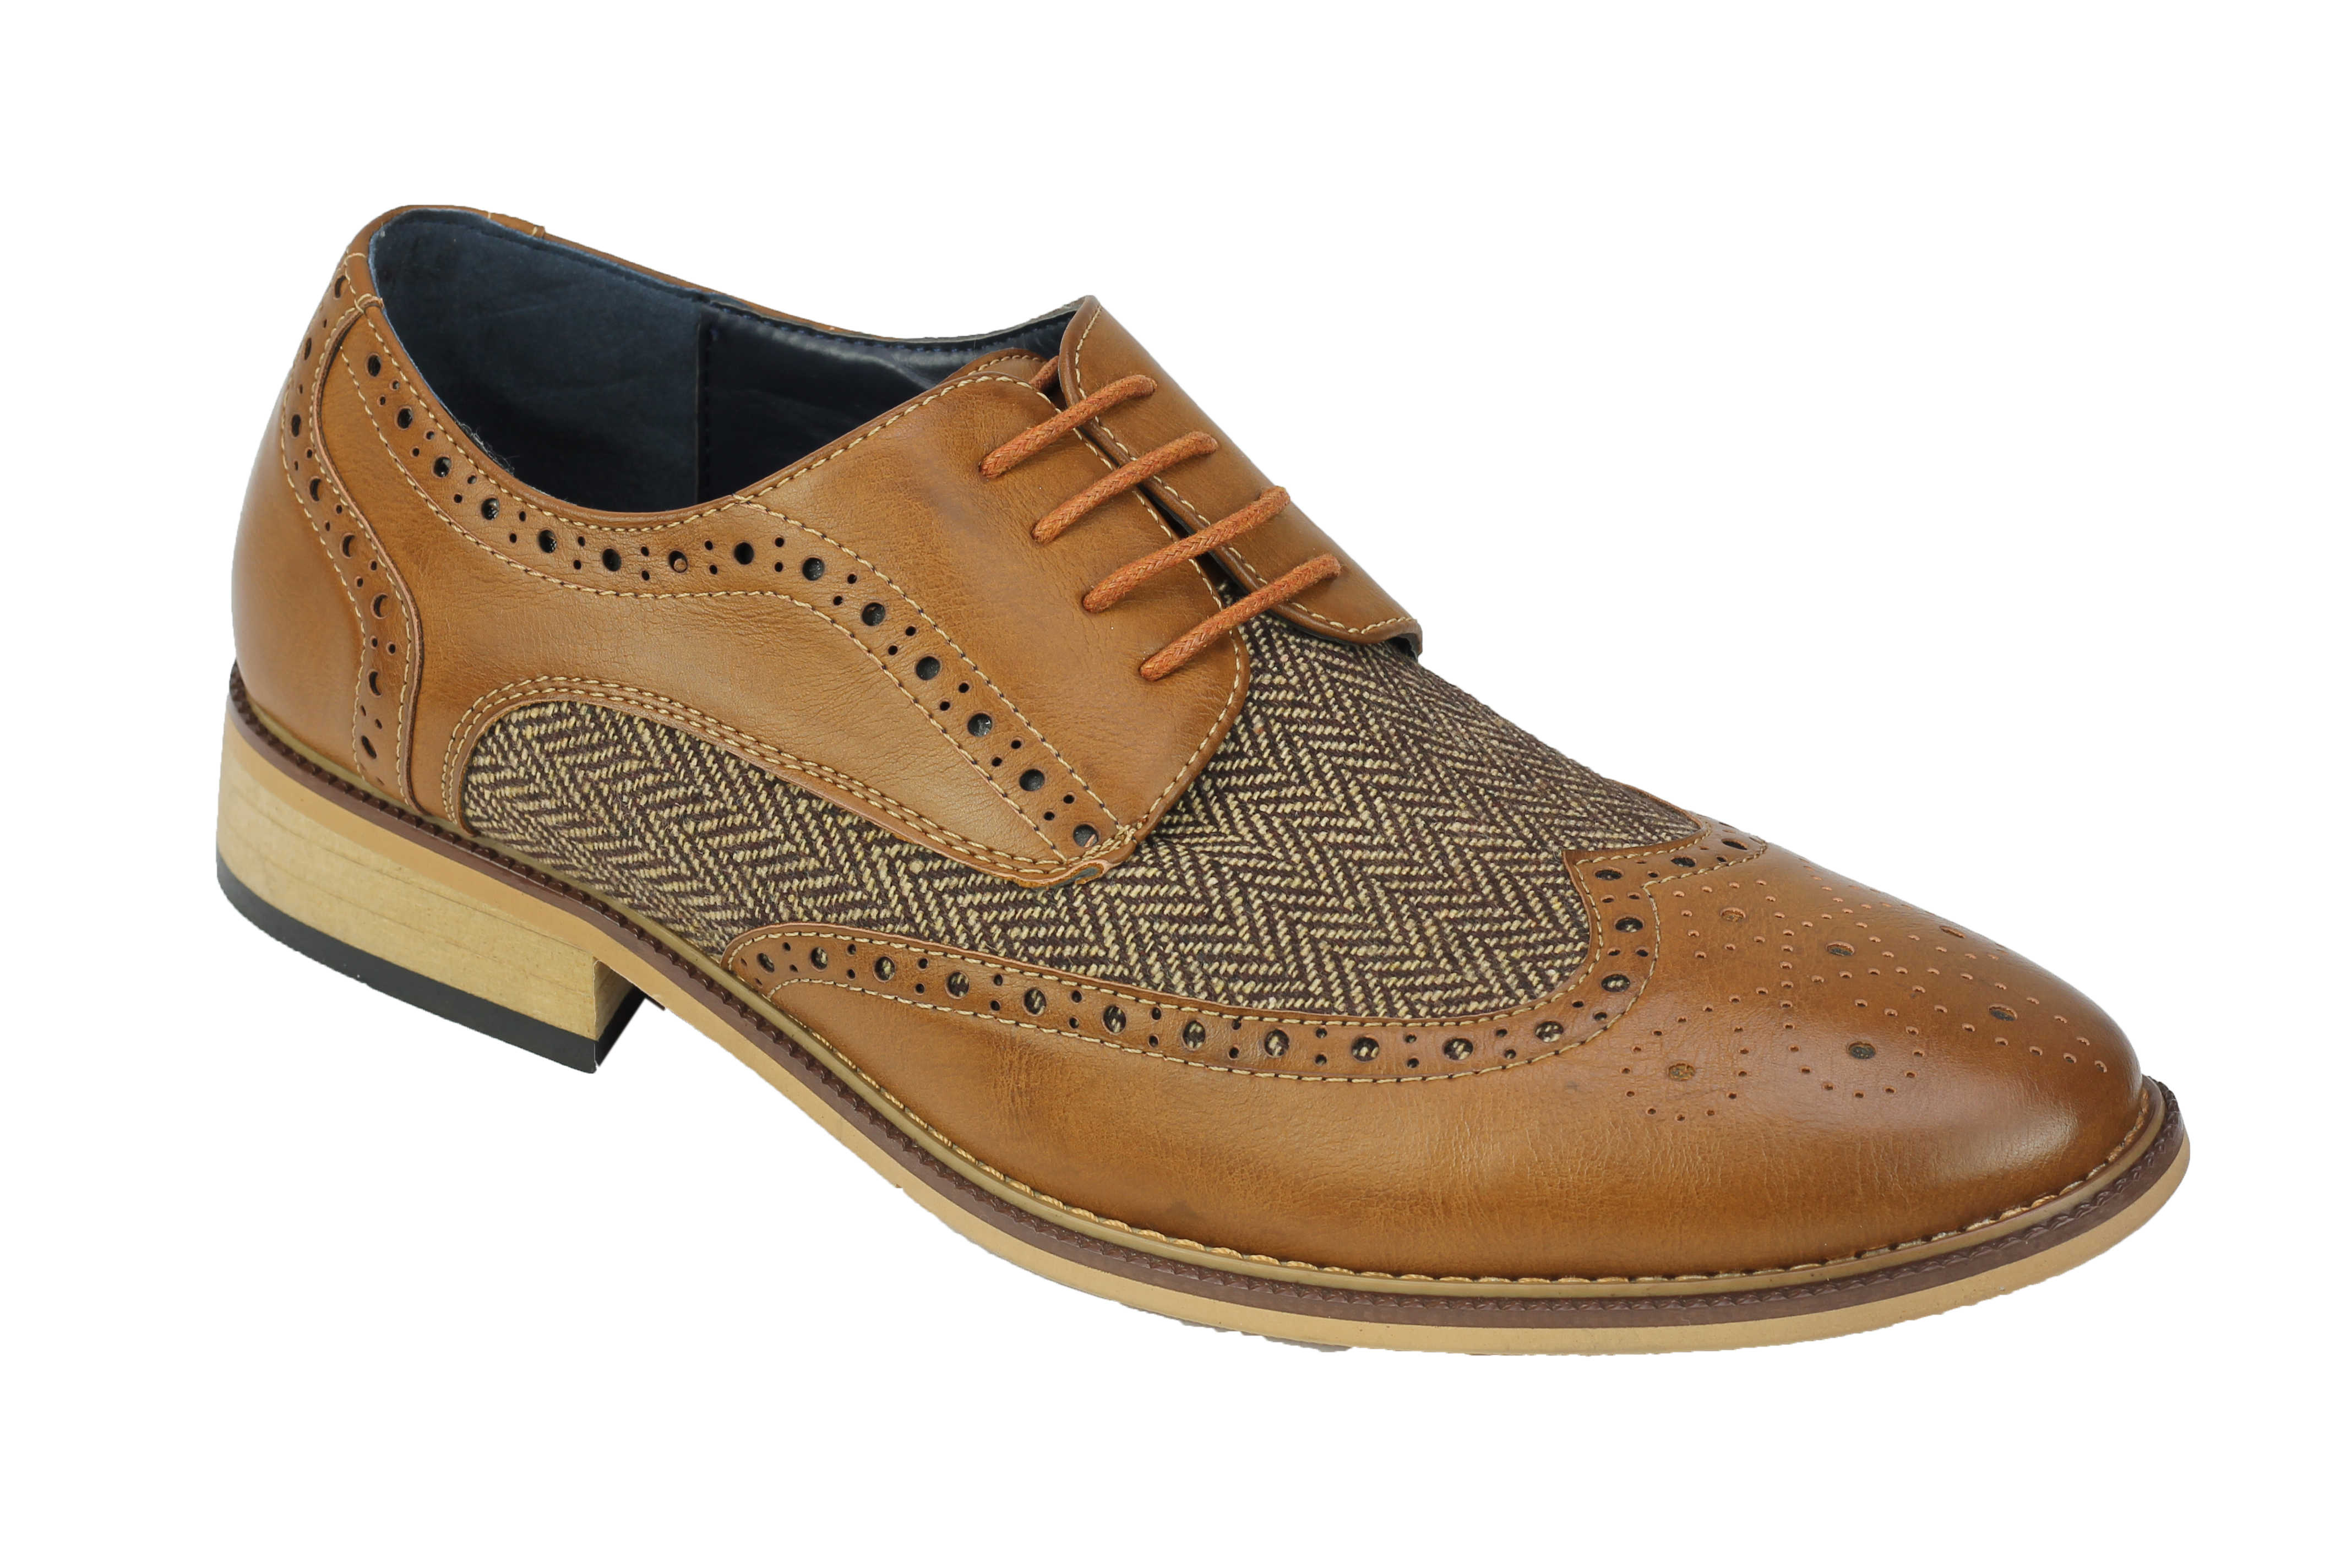 Mens Classic Gatsby Style Tweed Herringbone Formal Brogue Shoes Oxford Lace Ups